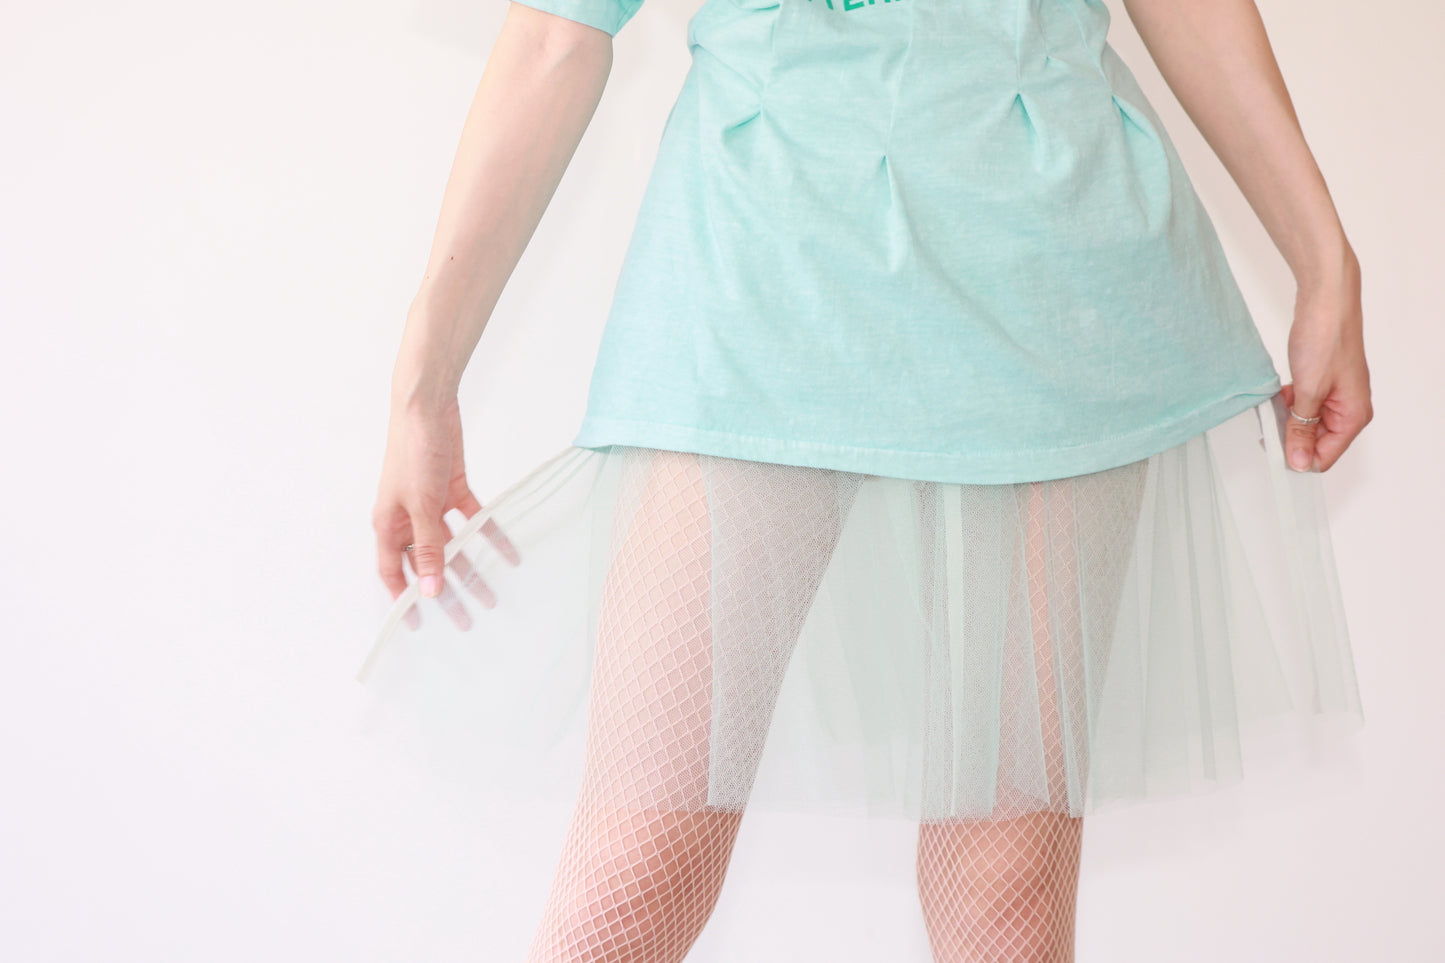 POTTOxUDW UP-CYCLED PIGMENT-DYED ATTACHABLE TULLE ONE-PIECE DRESS, RUGBY BEAR